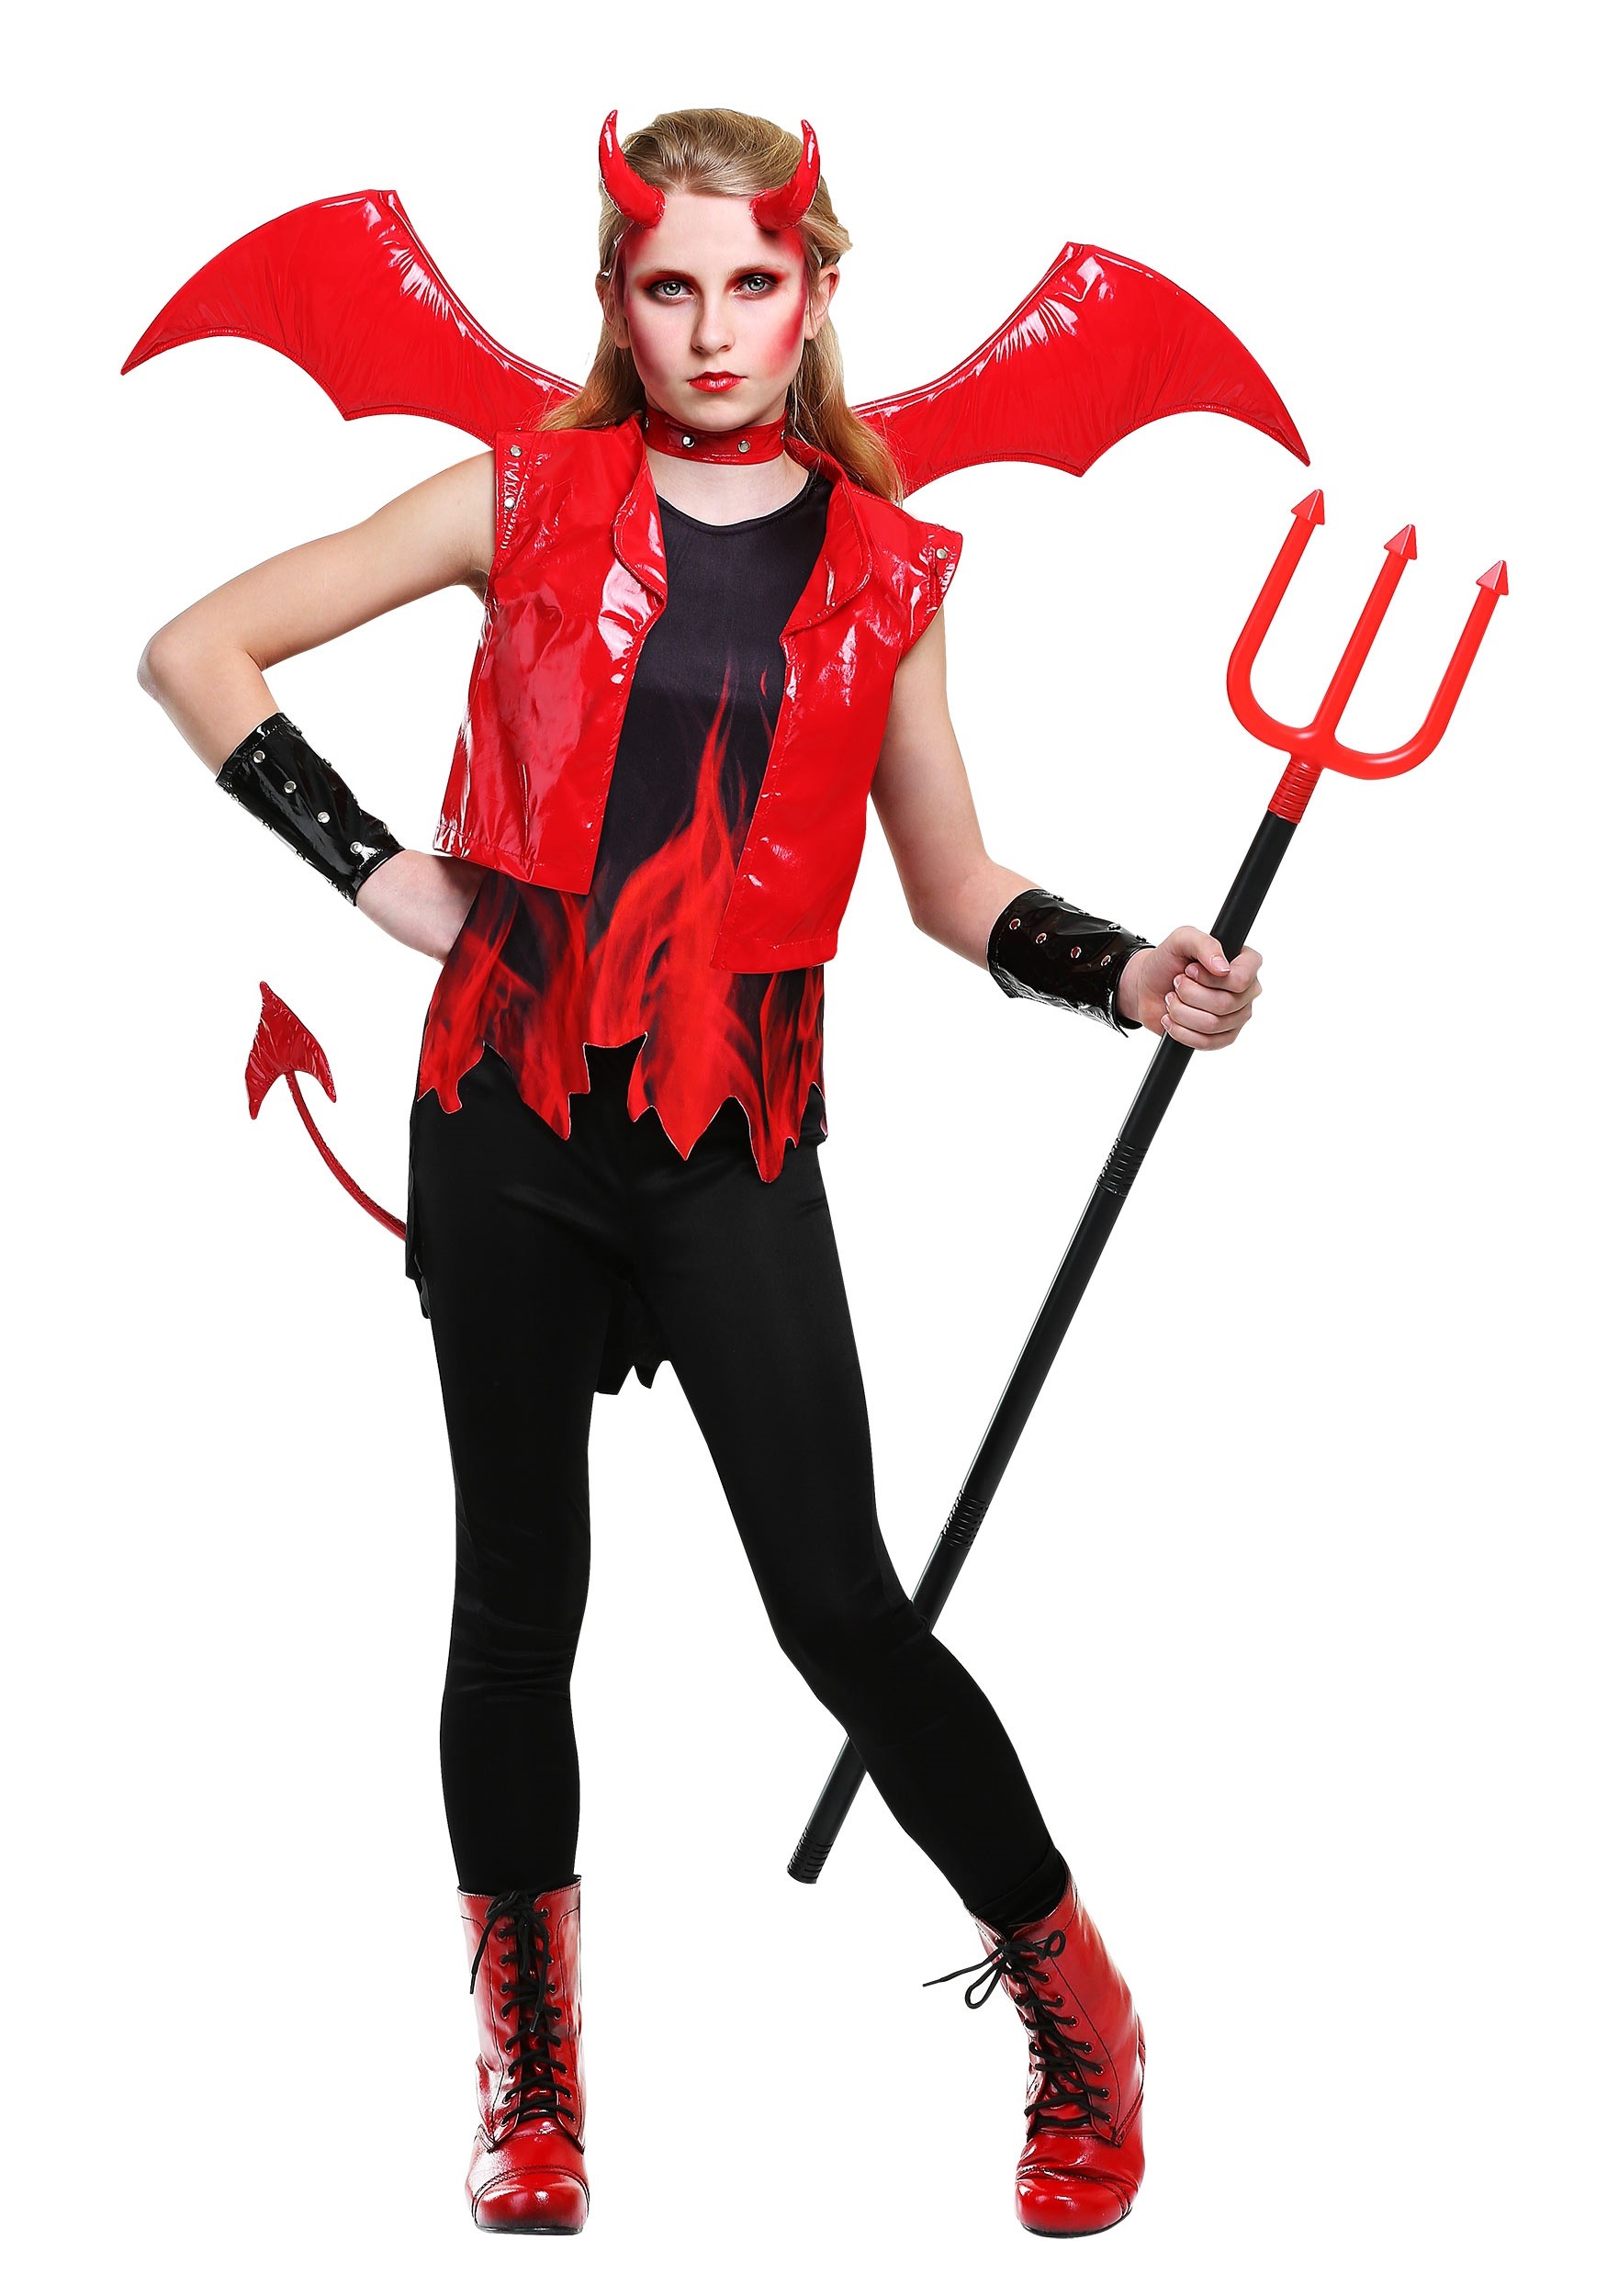 Adult Devil Girls Costumes For Customized Demon Women Dress For Halloween Party Fancy Dress 6789